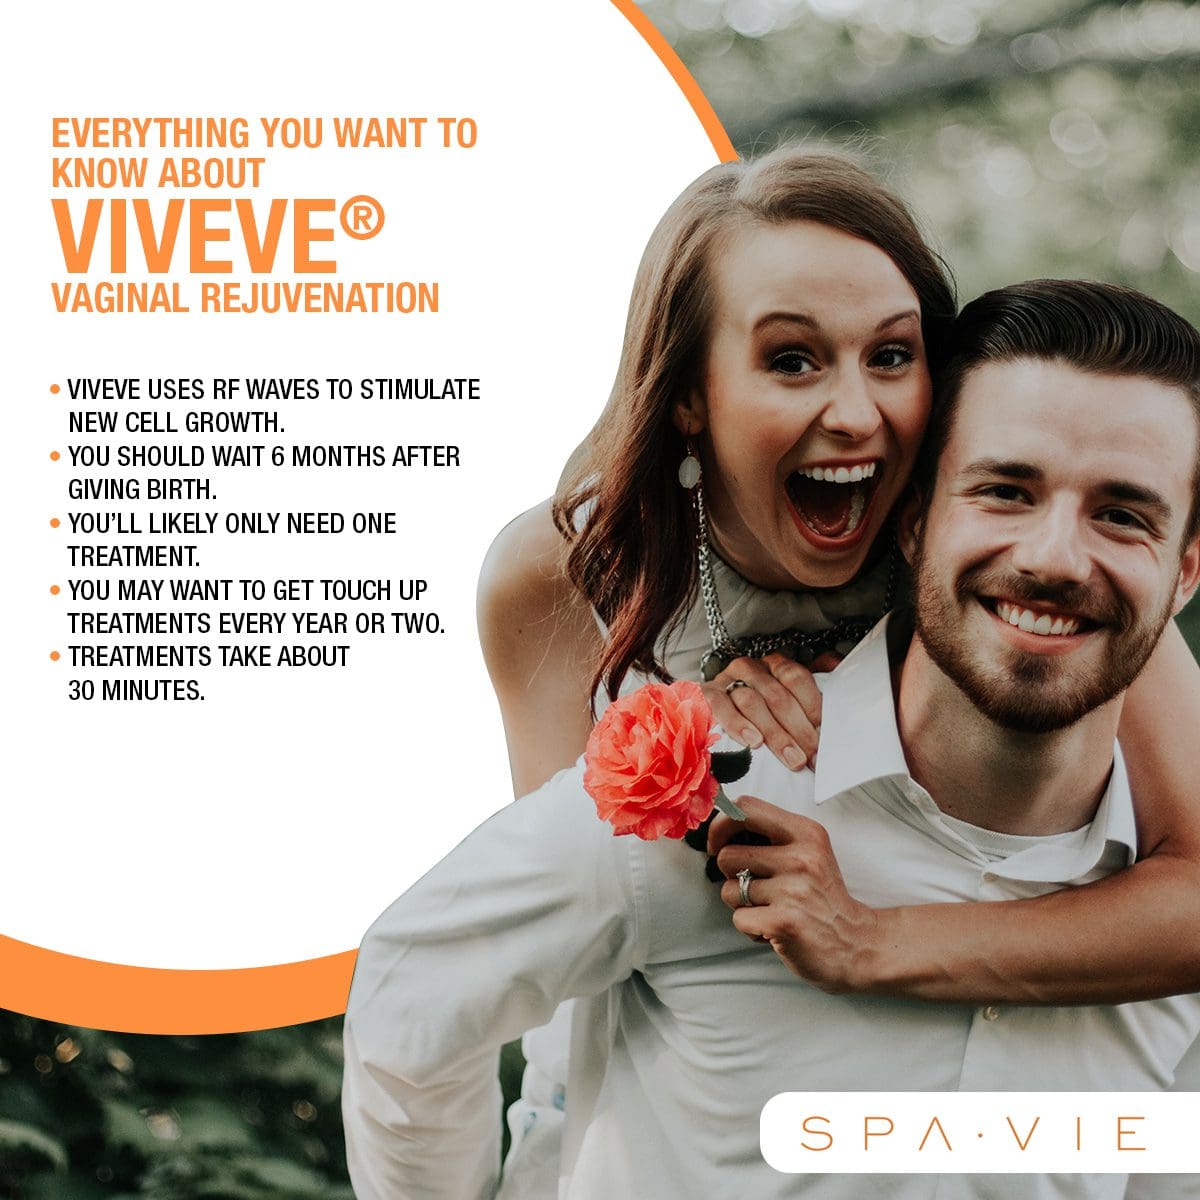 Everything You Want To Know About Viveve® Vaginal Rejuvenation [Infographic]